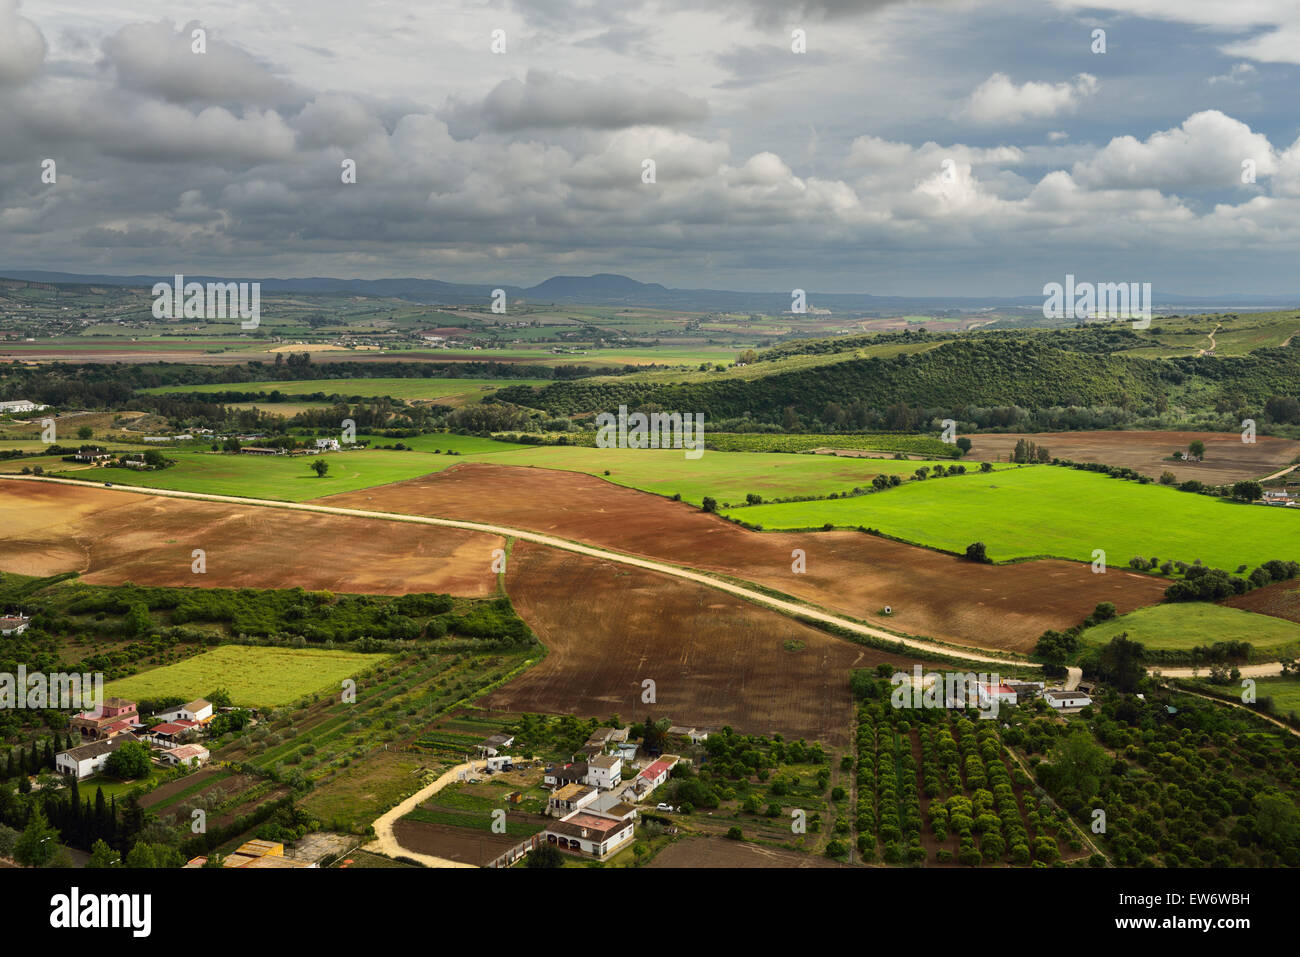 Sunlit farms and fields below Arcos de la Frontera Andalusia Spain Stock Photo